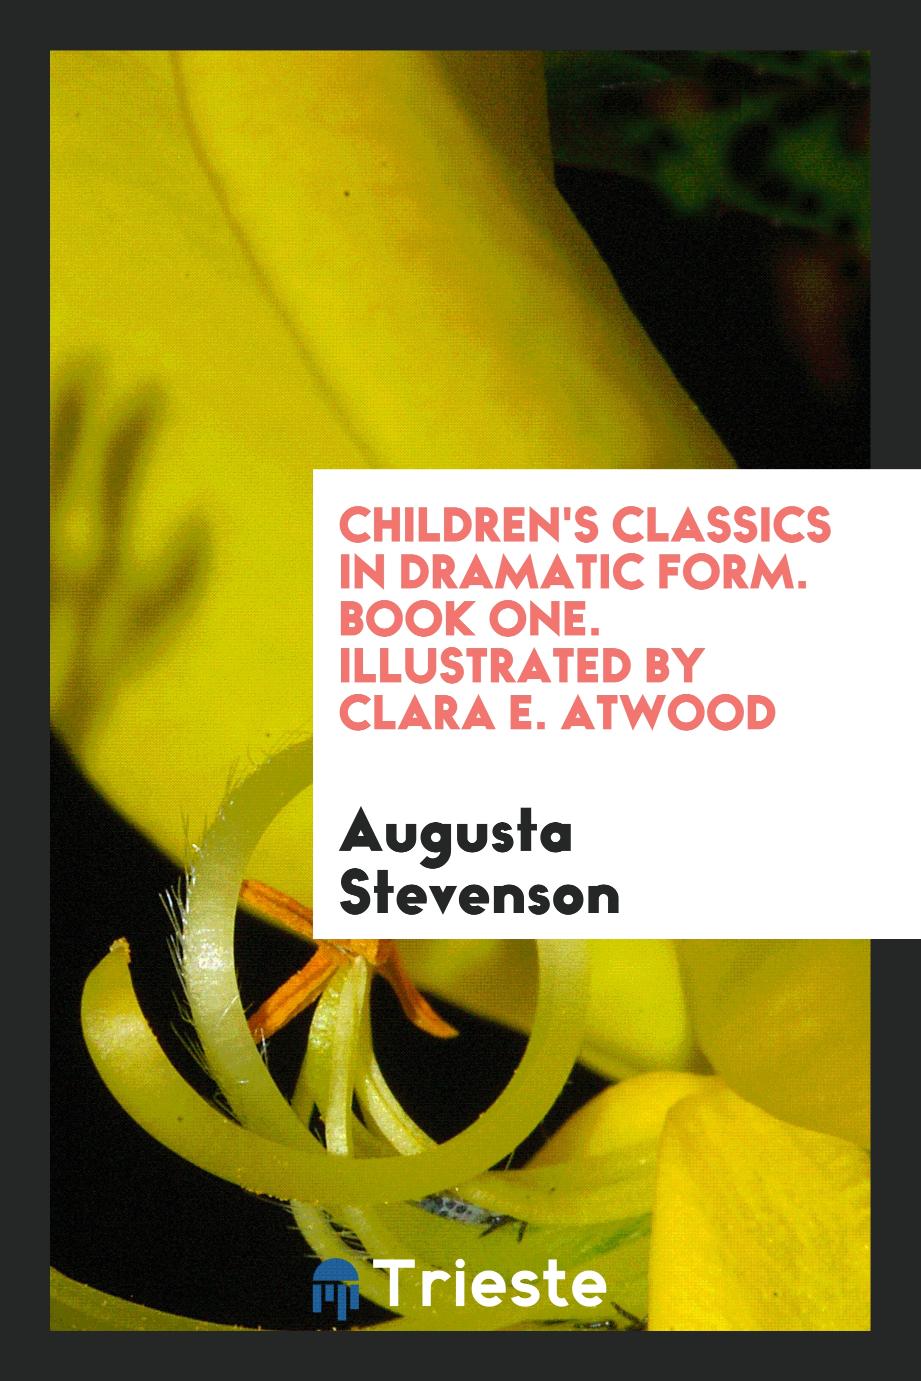 Children's Classics in Dramatic Form. Book One. Illustrated by Clara E. Atwood